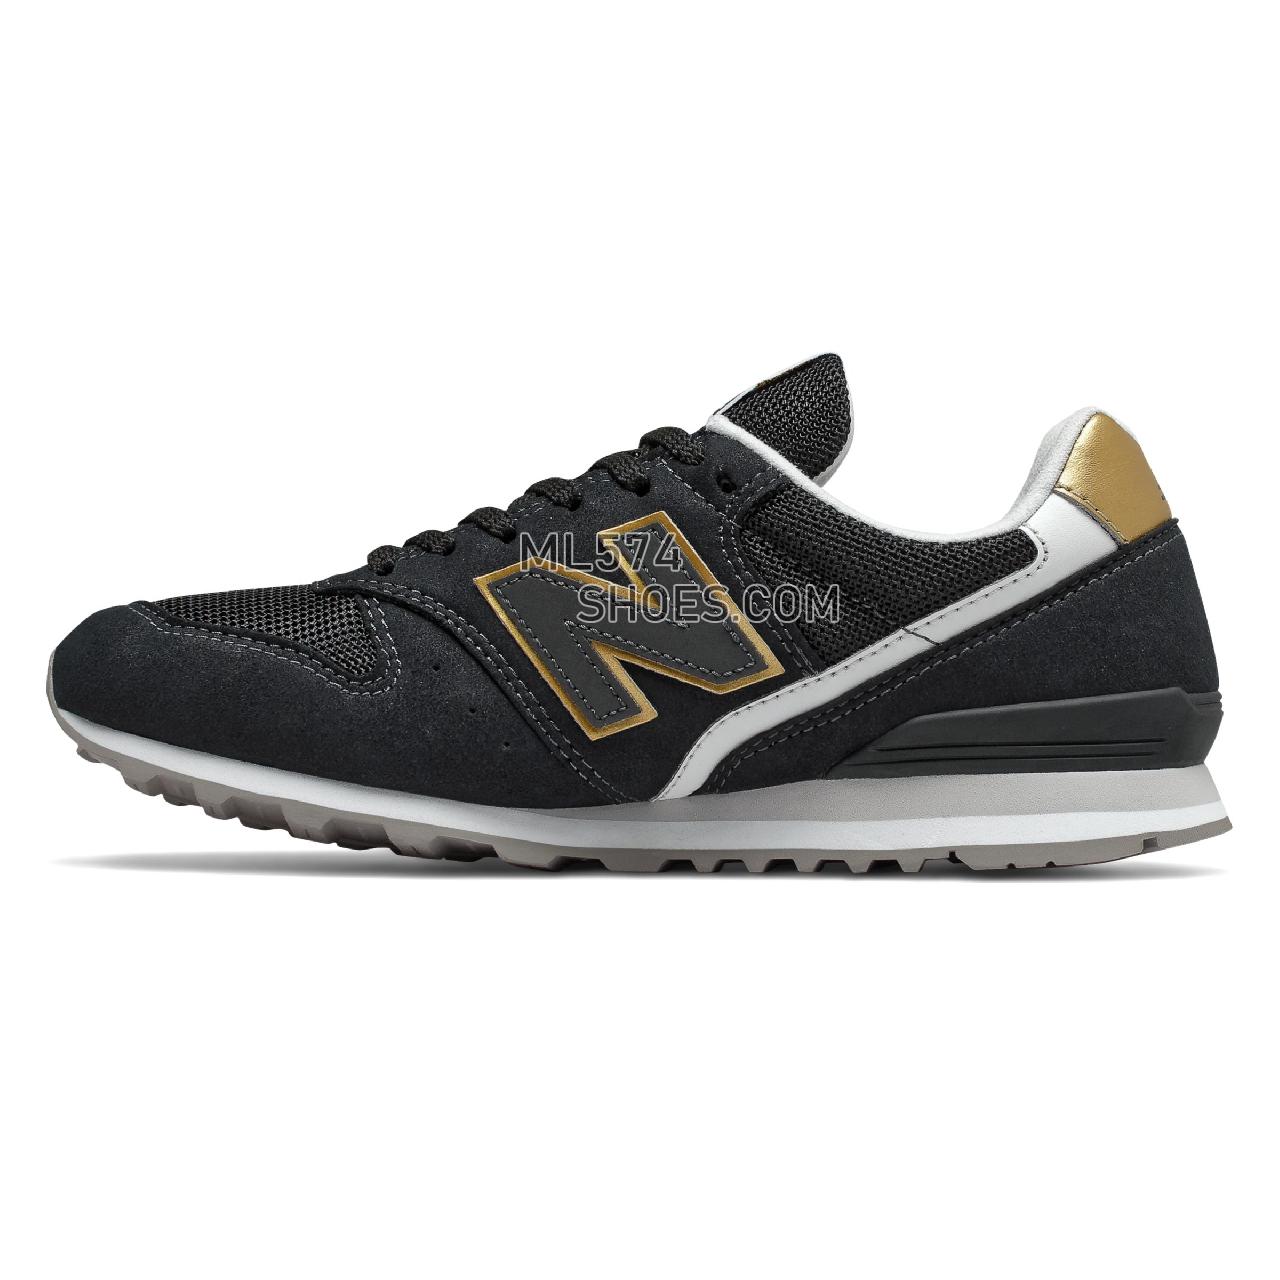 New Balance 996 - Women's Classic Sneakers - Black with Classic Gold - WL996CD